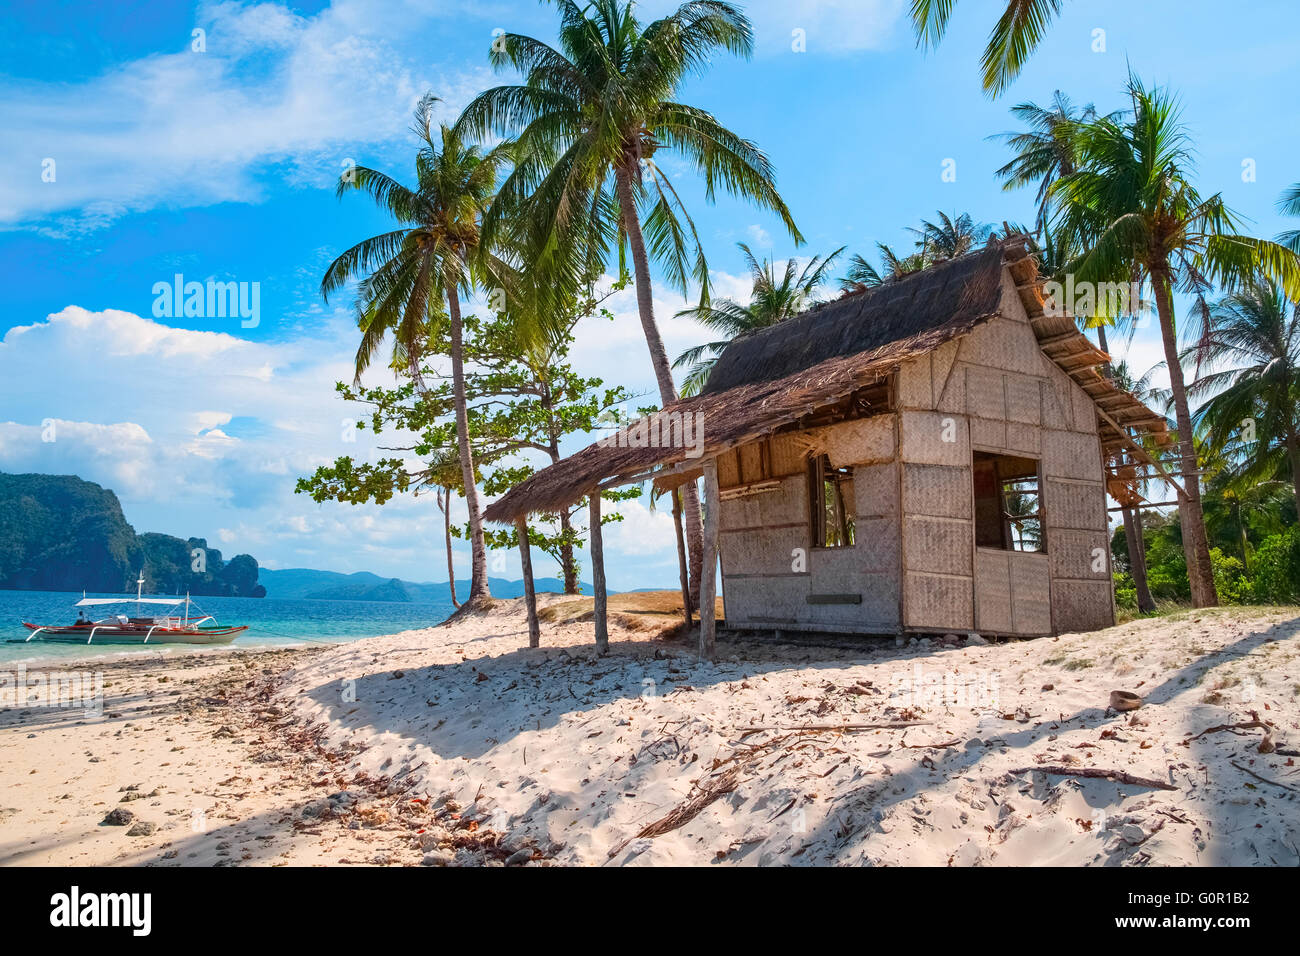 Tropical island landscape, Palawan, Philippines, Southeast Asia Stock Photo